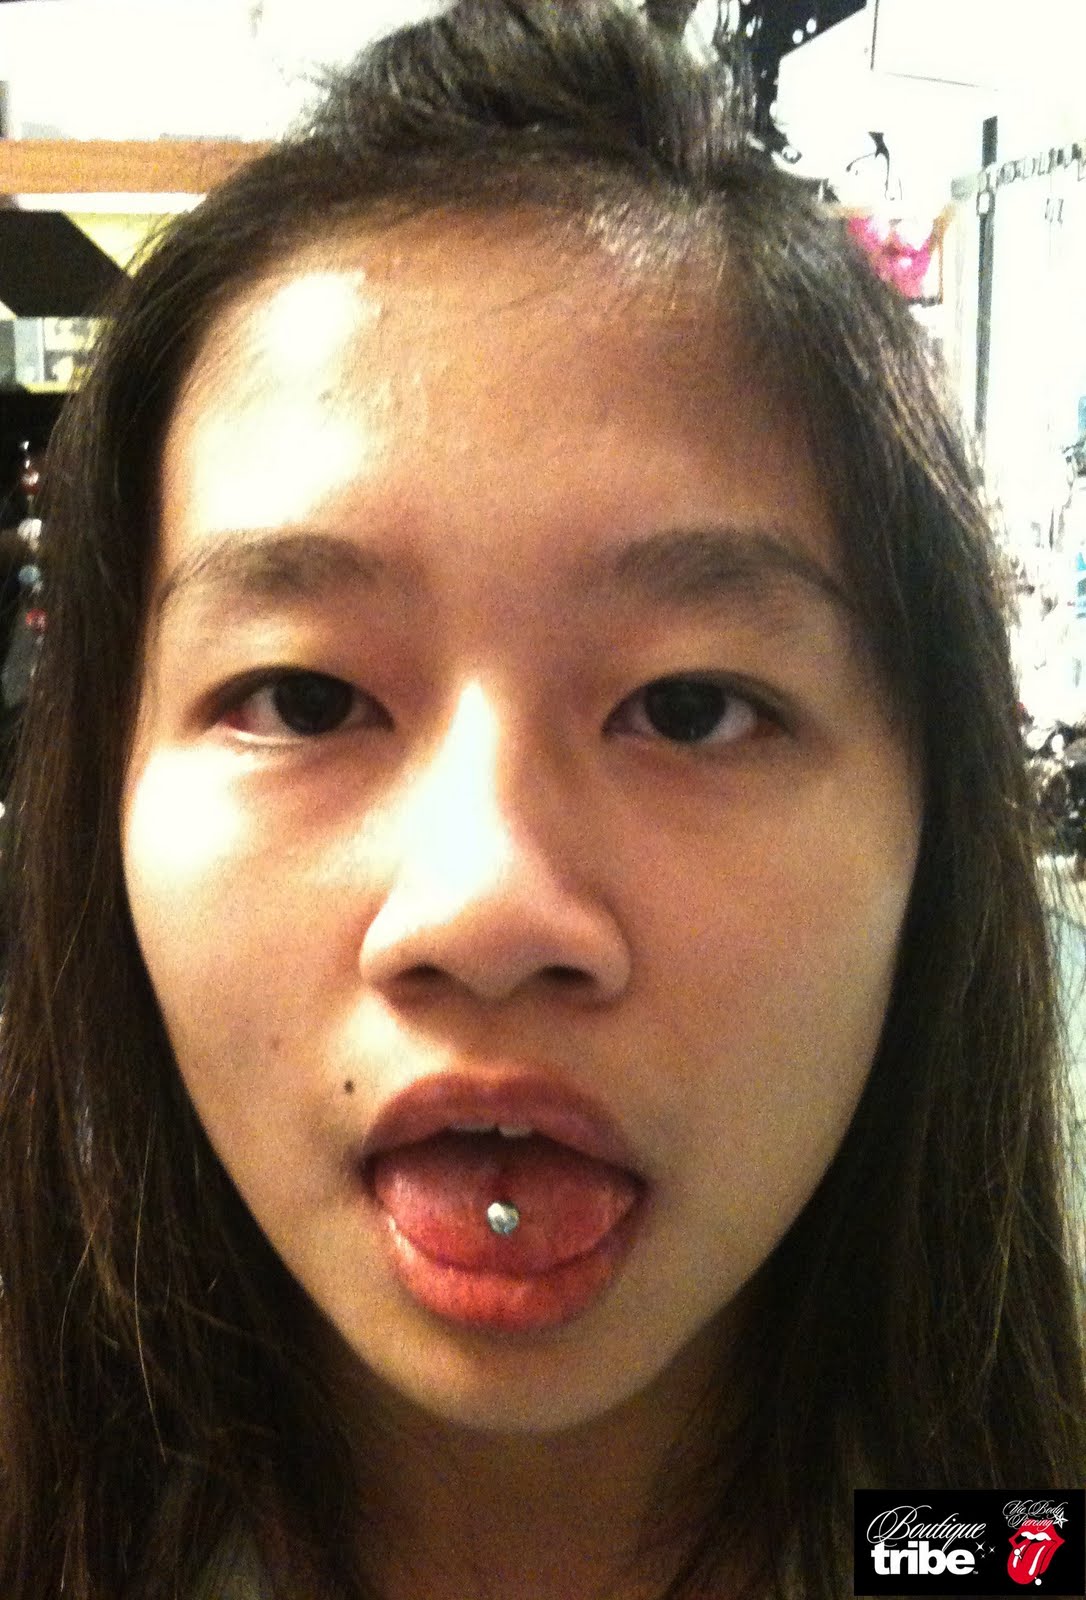 Vie Body Piercing @ Boutique Tribe: Tongue piercing1086 x 1600